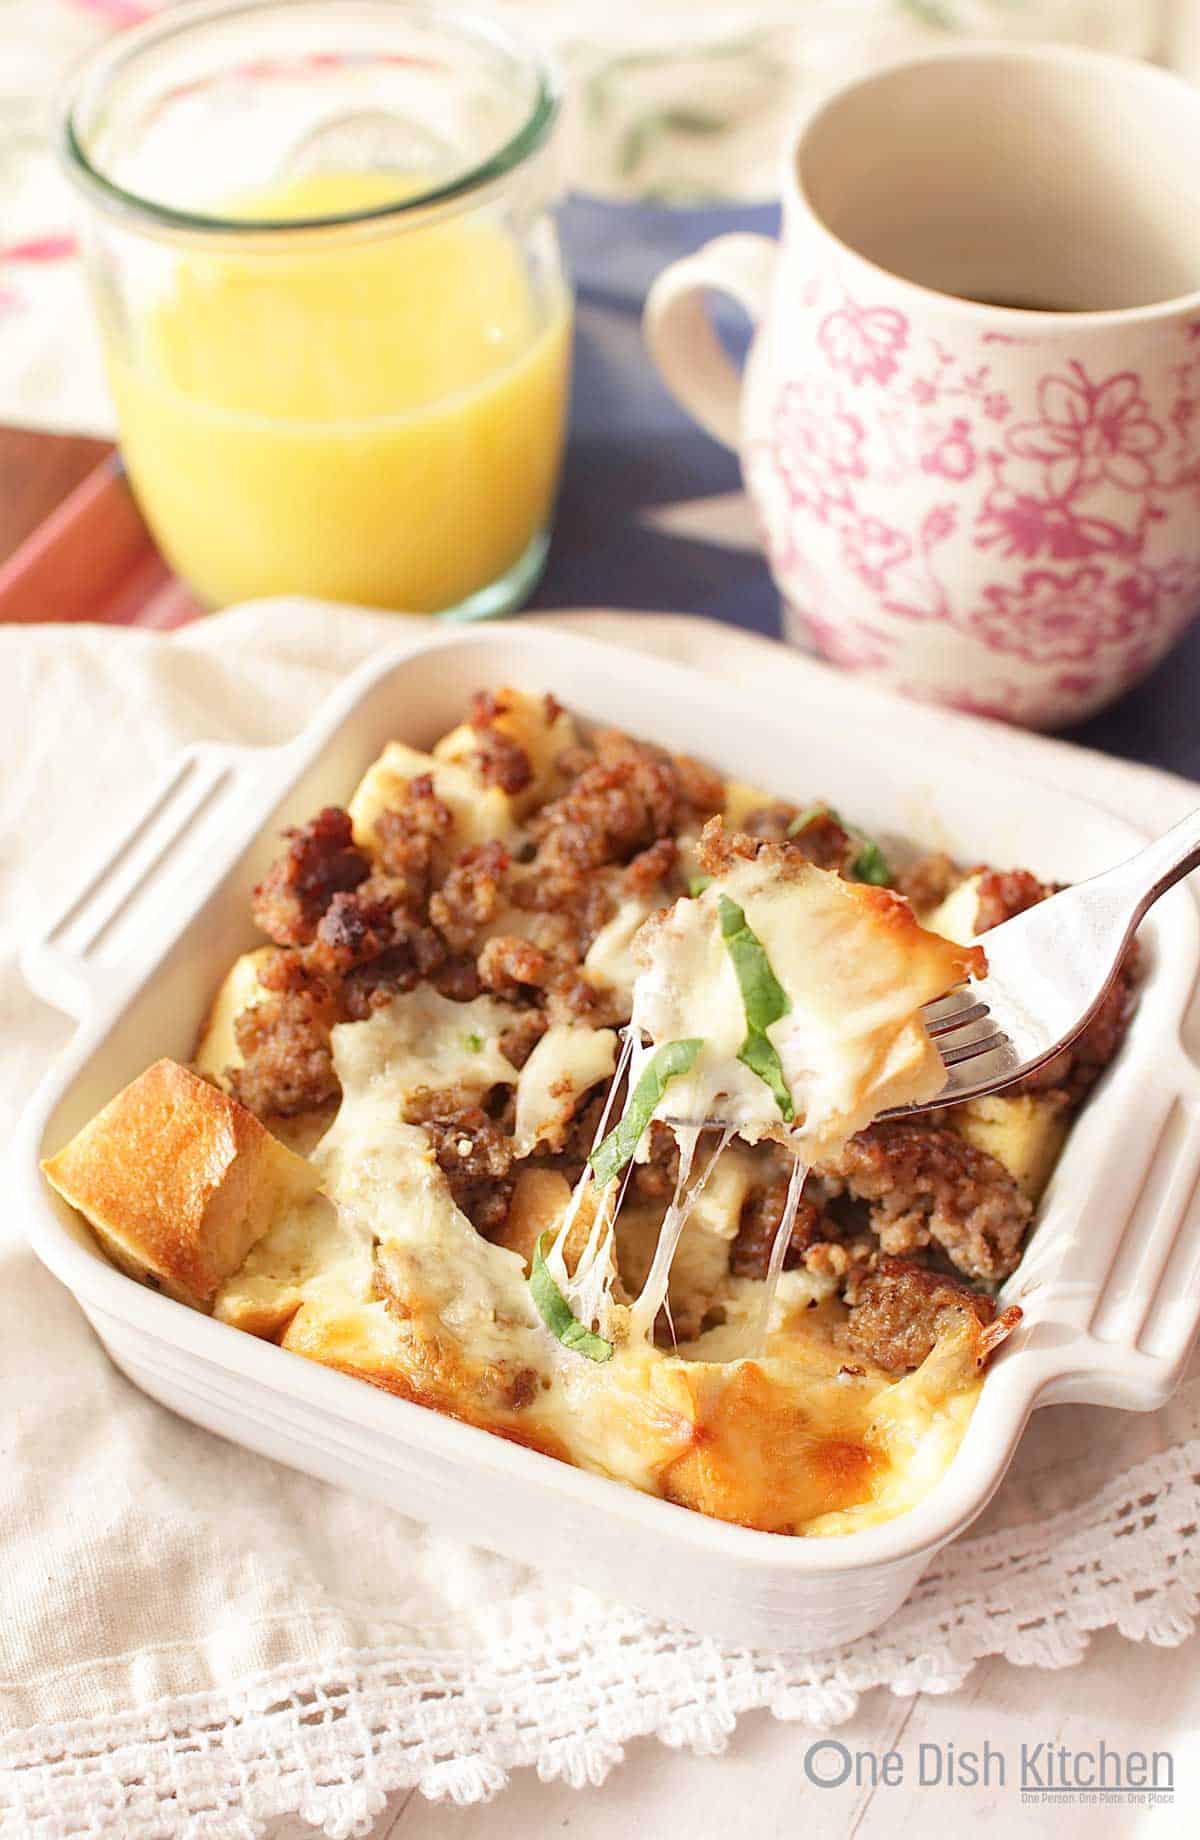 A forkful of breakfast casserole from a small baking dish next to a glass of orange juice and a coffee mug.